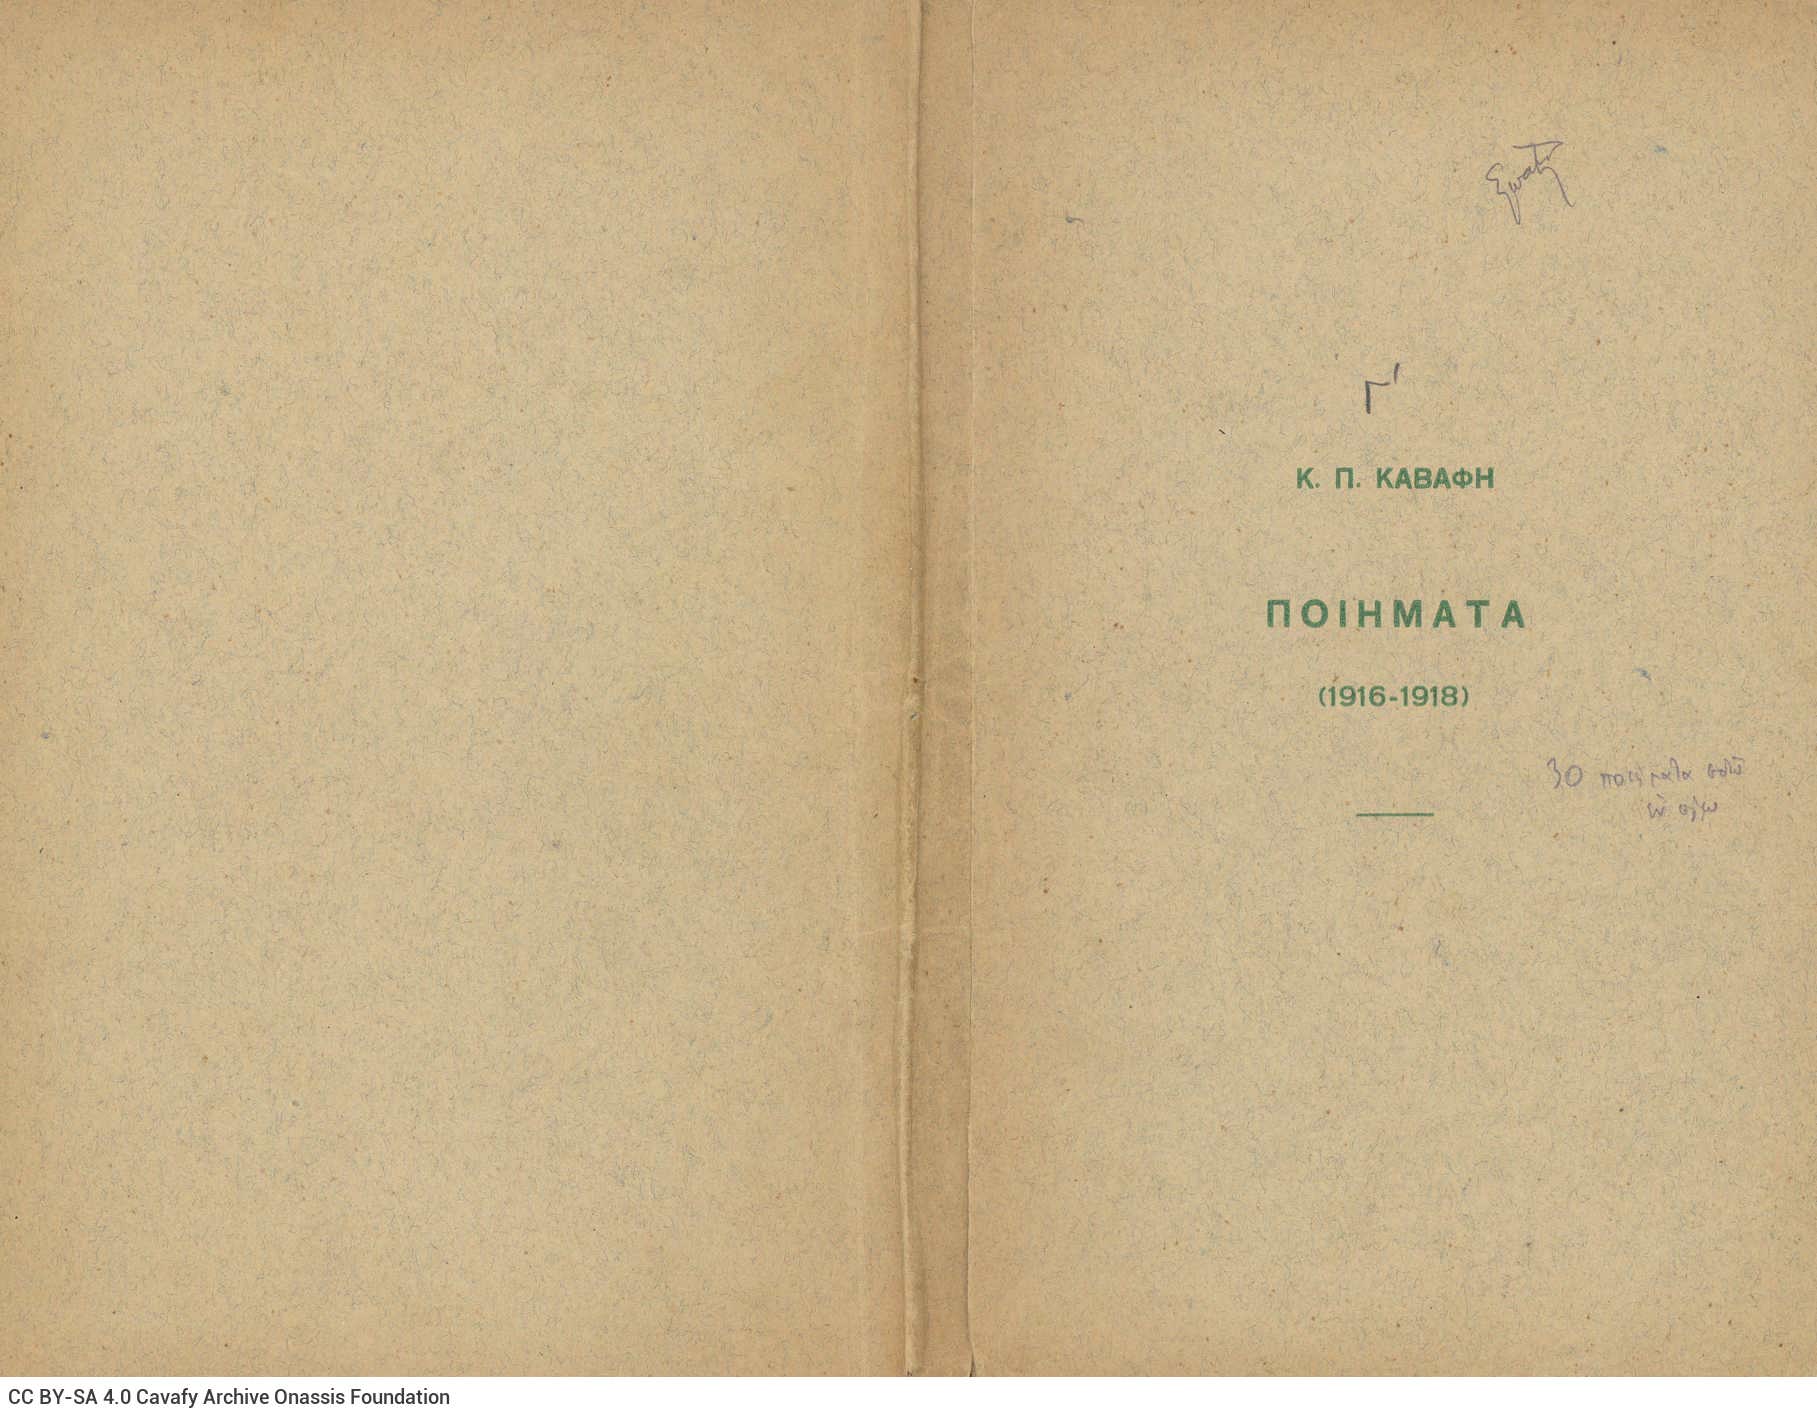 Two copies of a poetry collection by Cavafy (Γ2). The title "C. P. Cavafy's Poems (1916-1918)" on the cover and title page. 